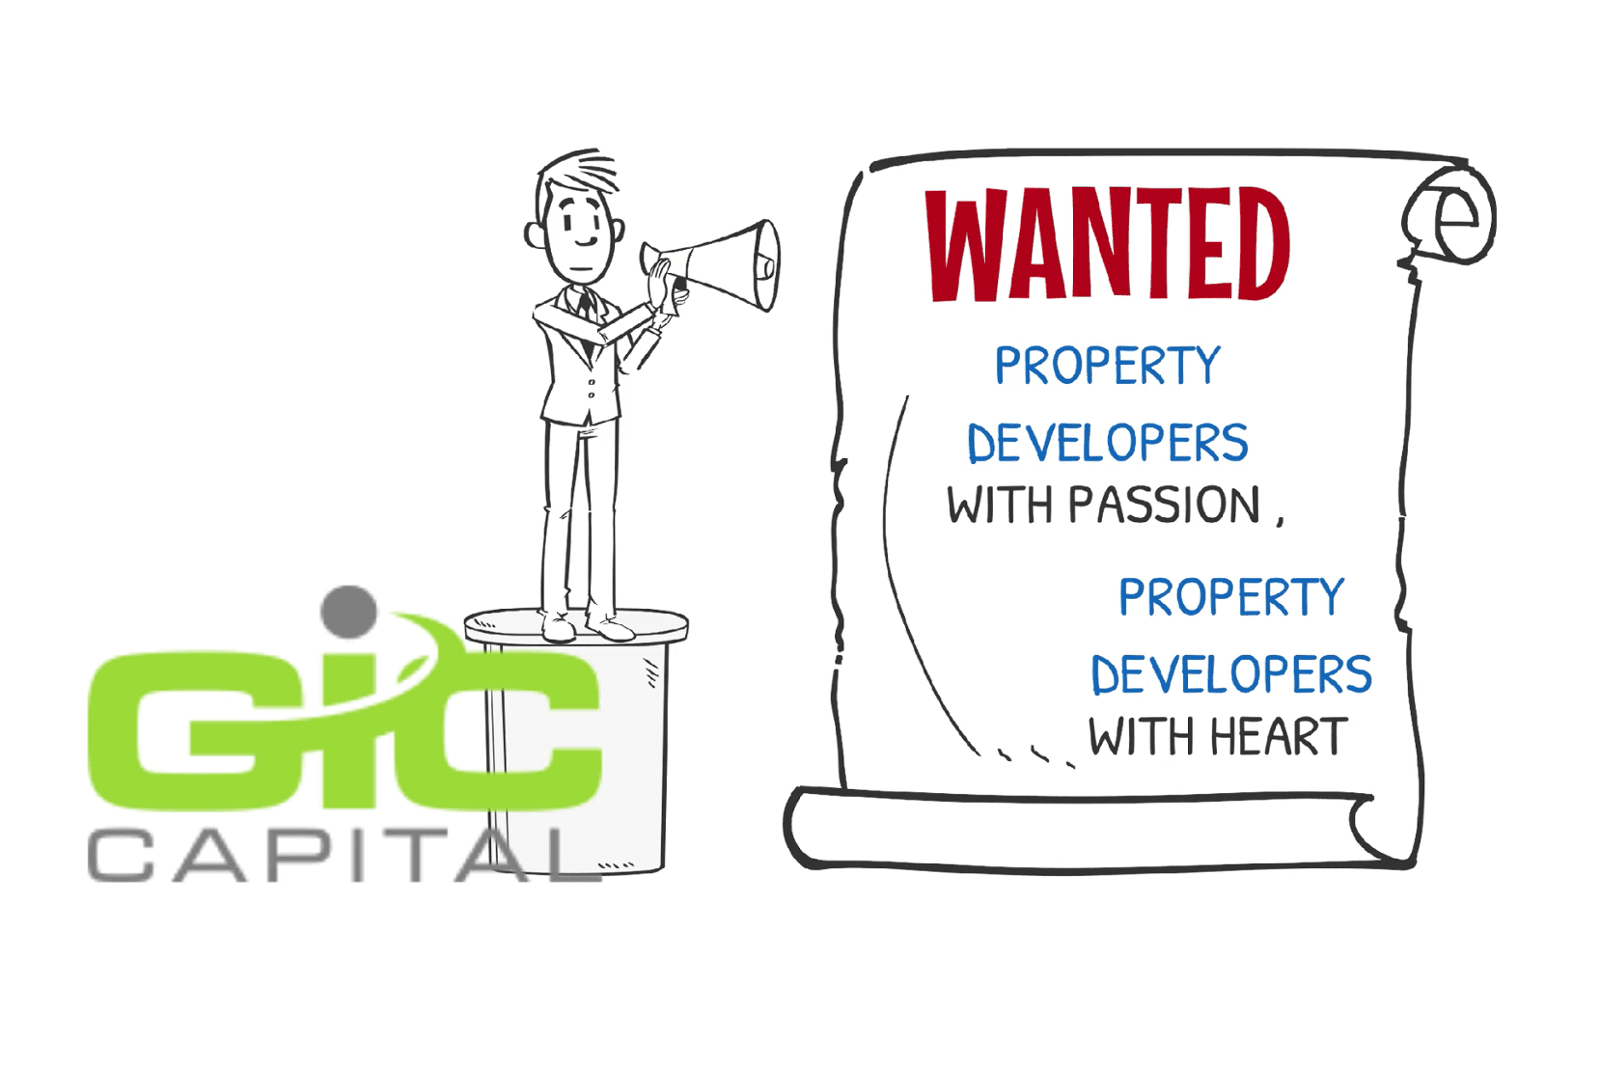 Wanted! Property developers with passion, Property developers with heart…